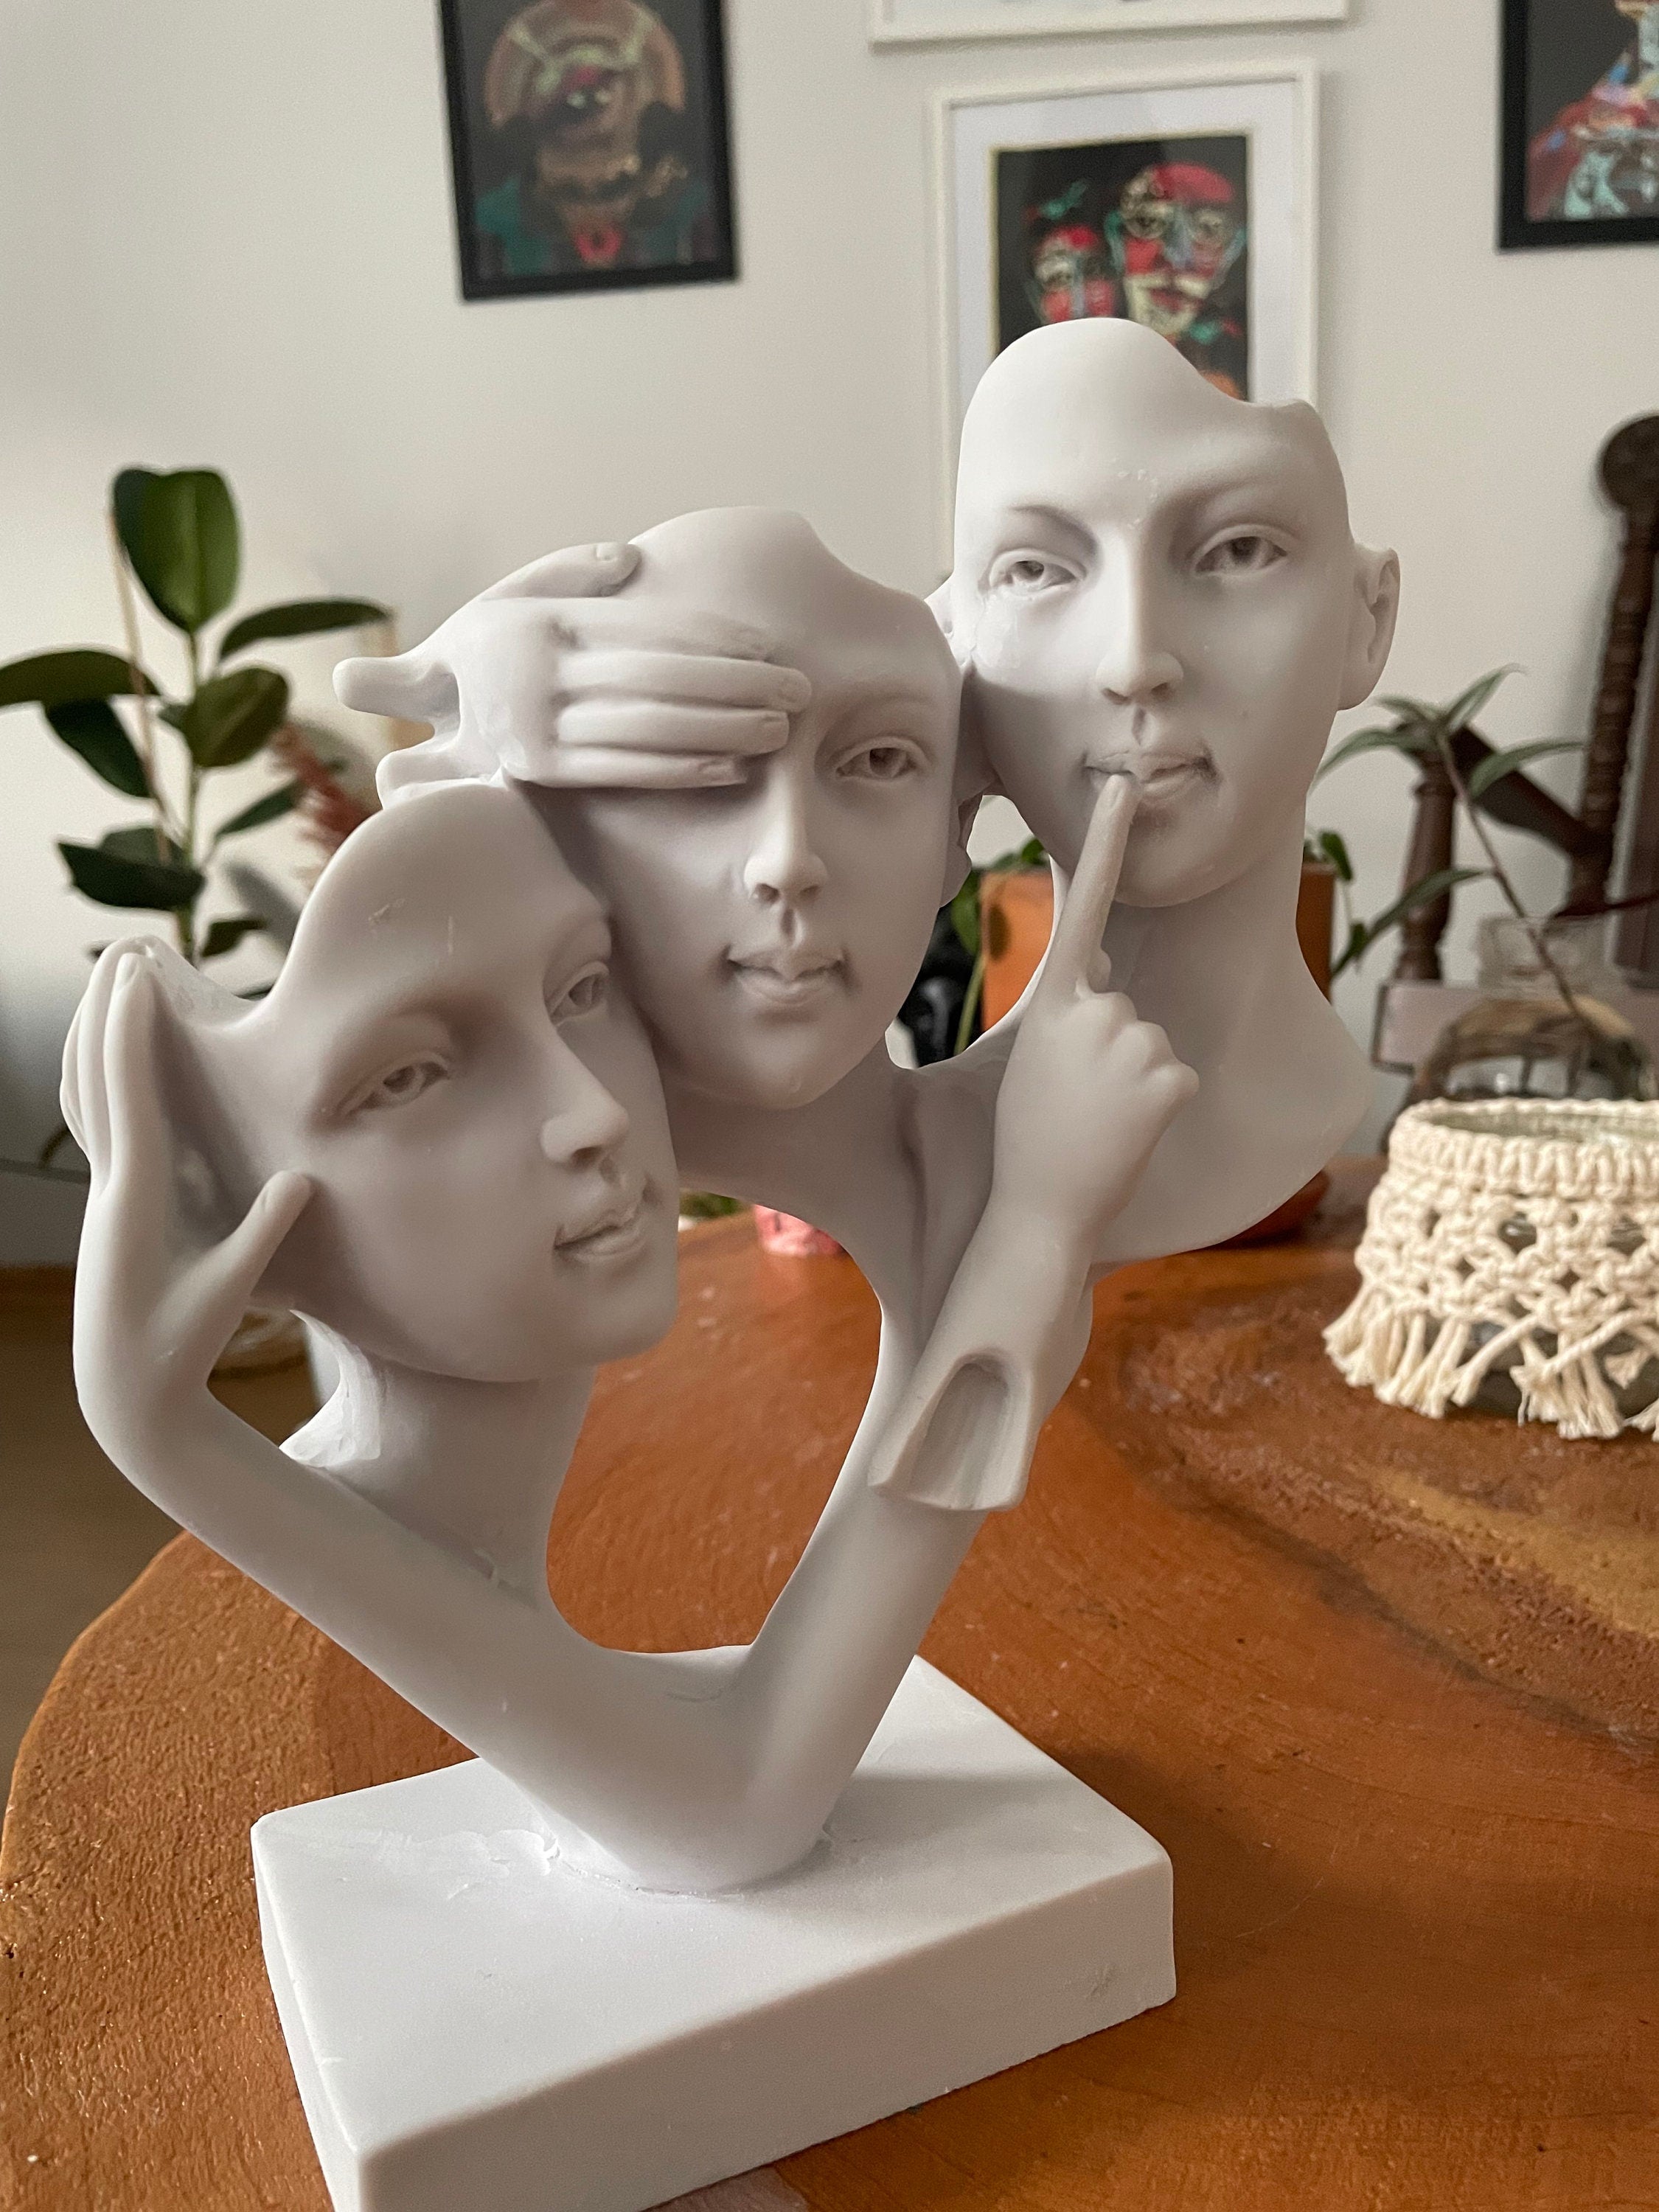 Majestic Mask Sculpture: A Grand Statement in Artistry